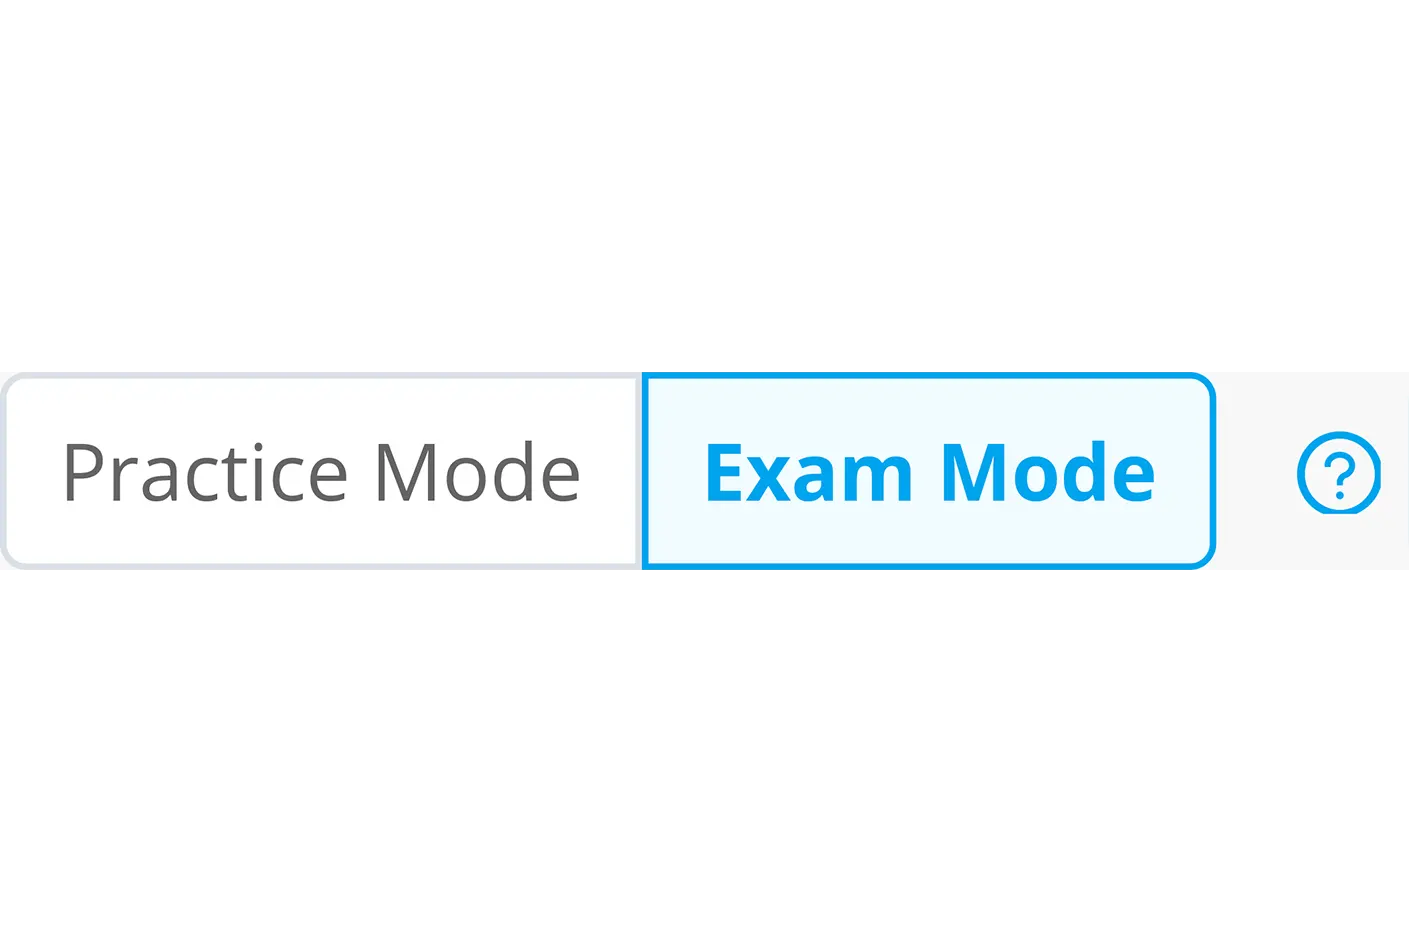 There is a screenshot of exam mode select for School Test practice test